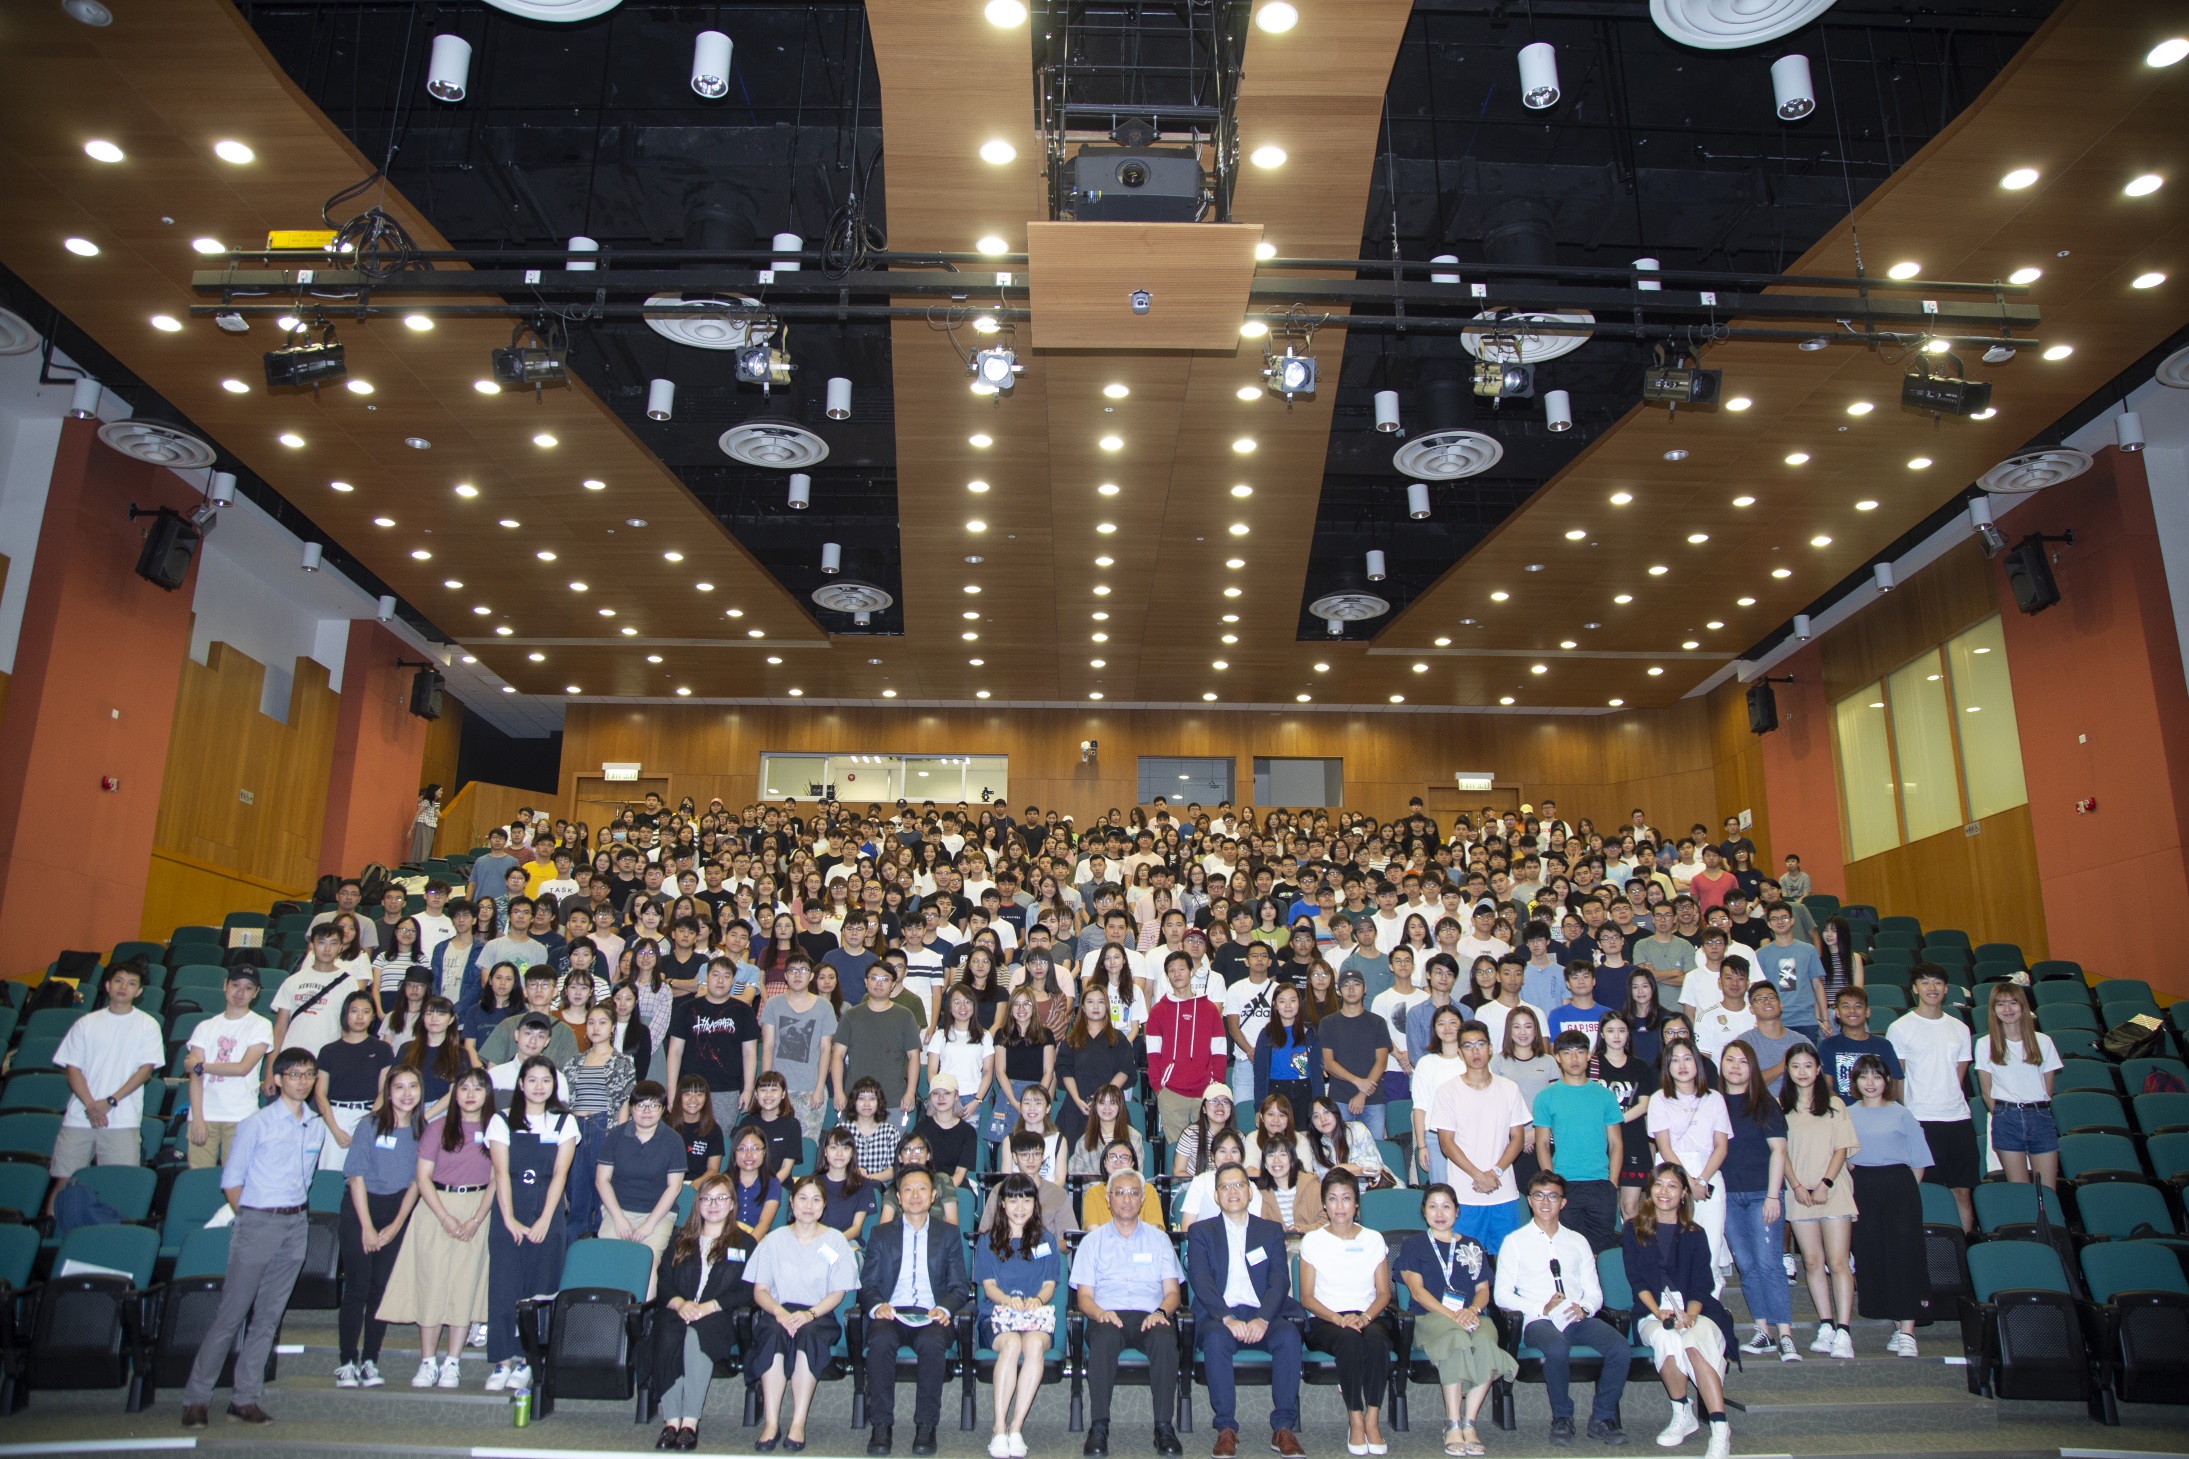 CIE New Student Orientation 2019-20 welcomes about 2,000 new students